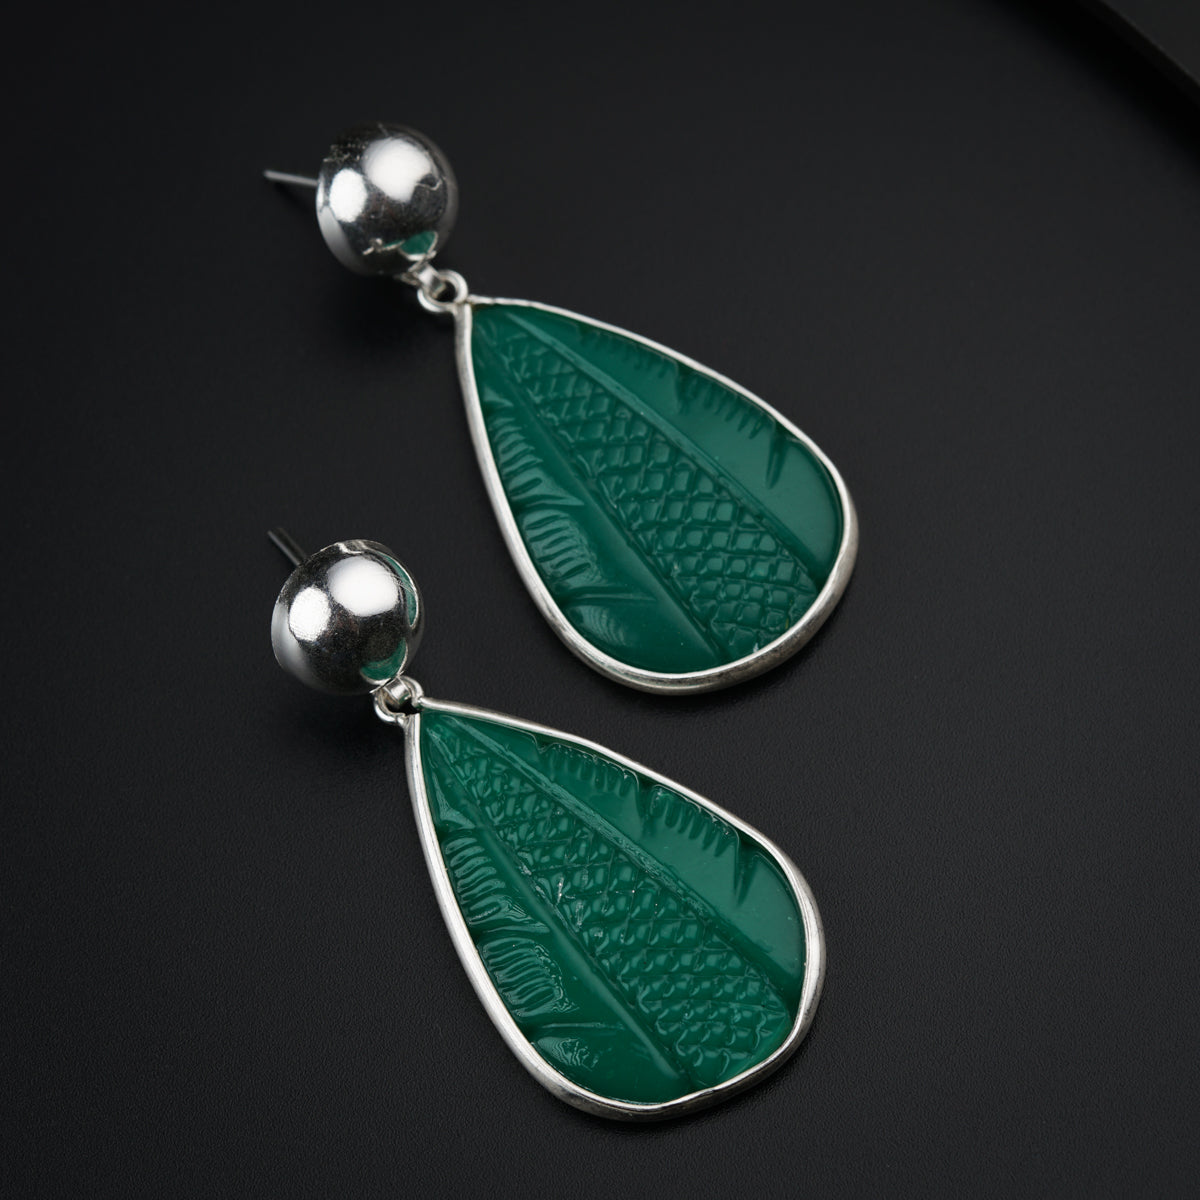 a pair of green earrings on a black surface